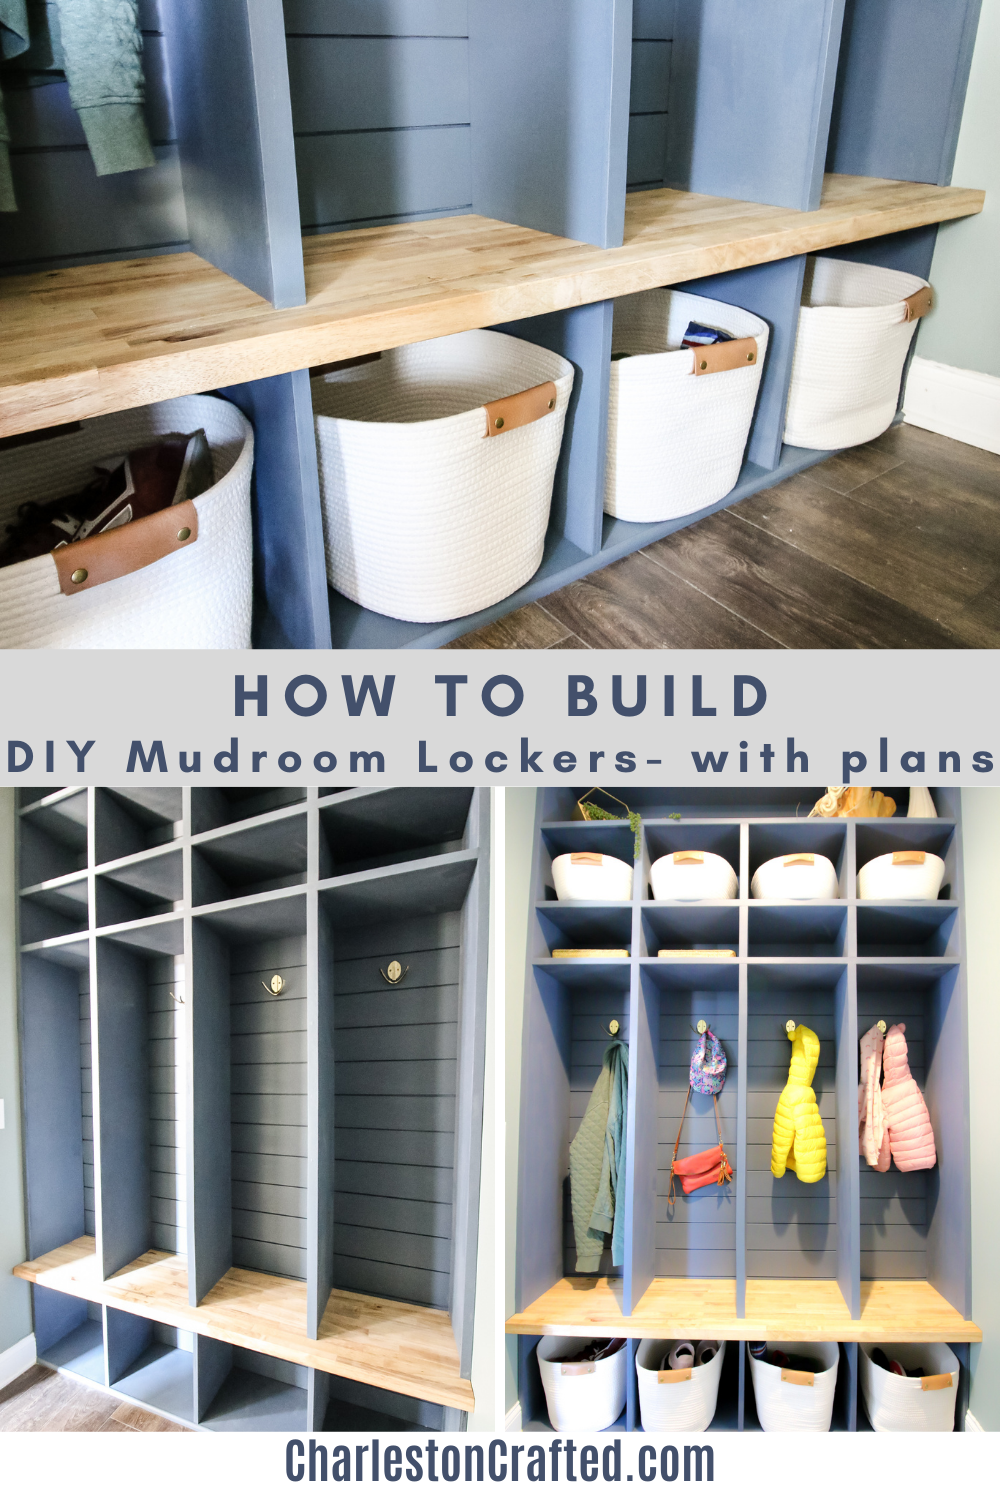 Making our Mudroom - House Homemade